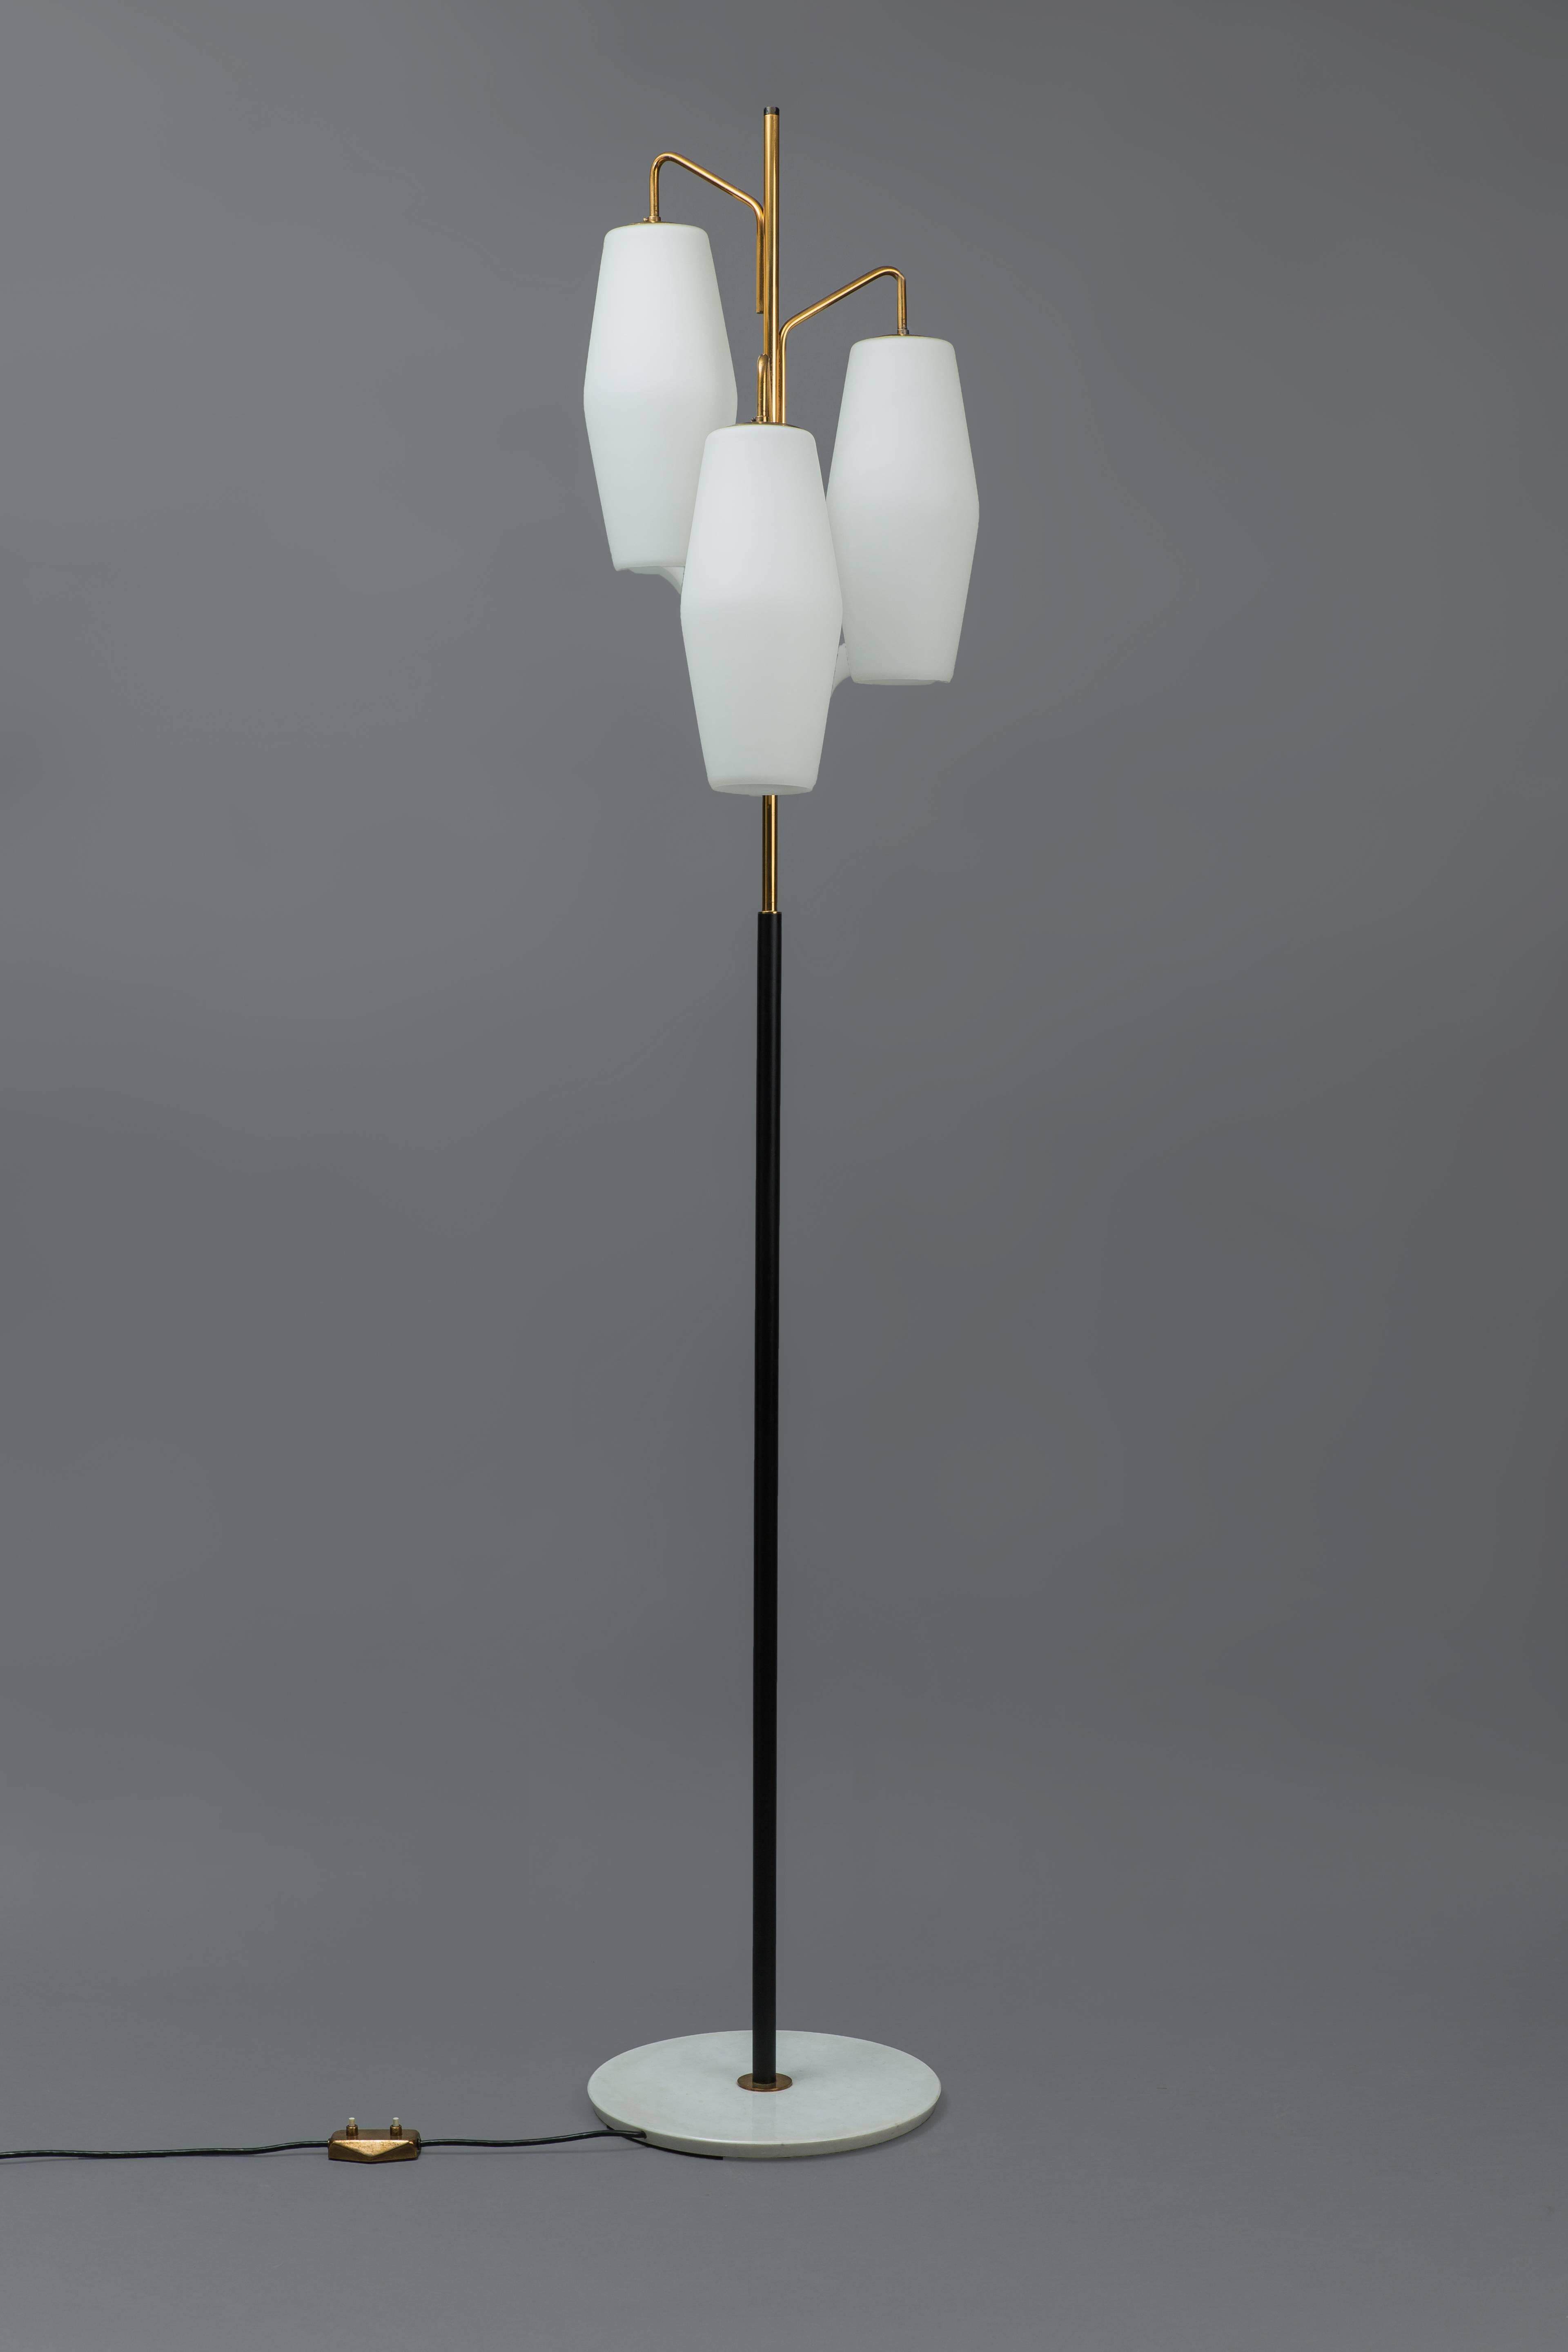 Opaline glass shades suspended on gilt lacquer and black painted metal stem on white marble base with original foot switch impressed 'Stilnovo Italy' on underside and manufacturer’s label 'Stilnovo / Milano Italy' affixed to the inside of the